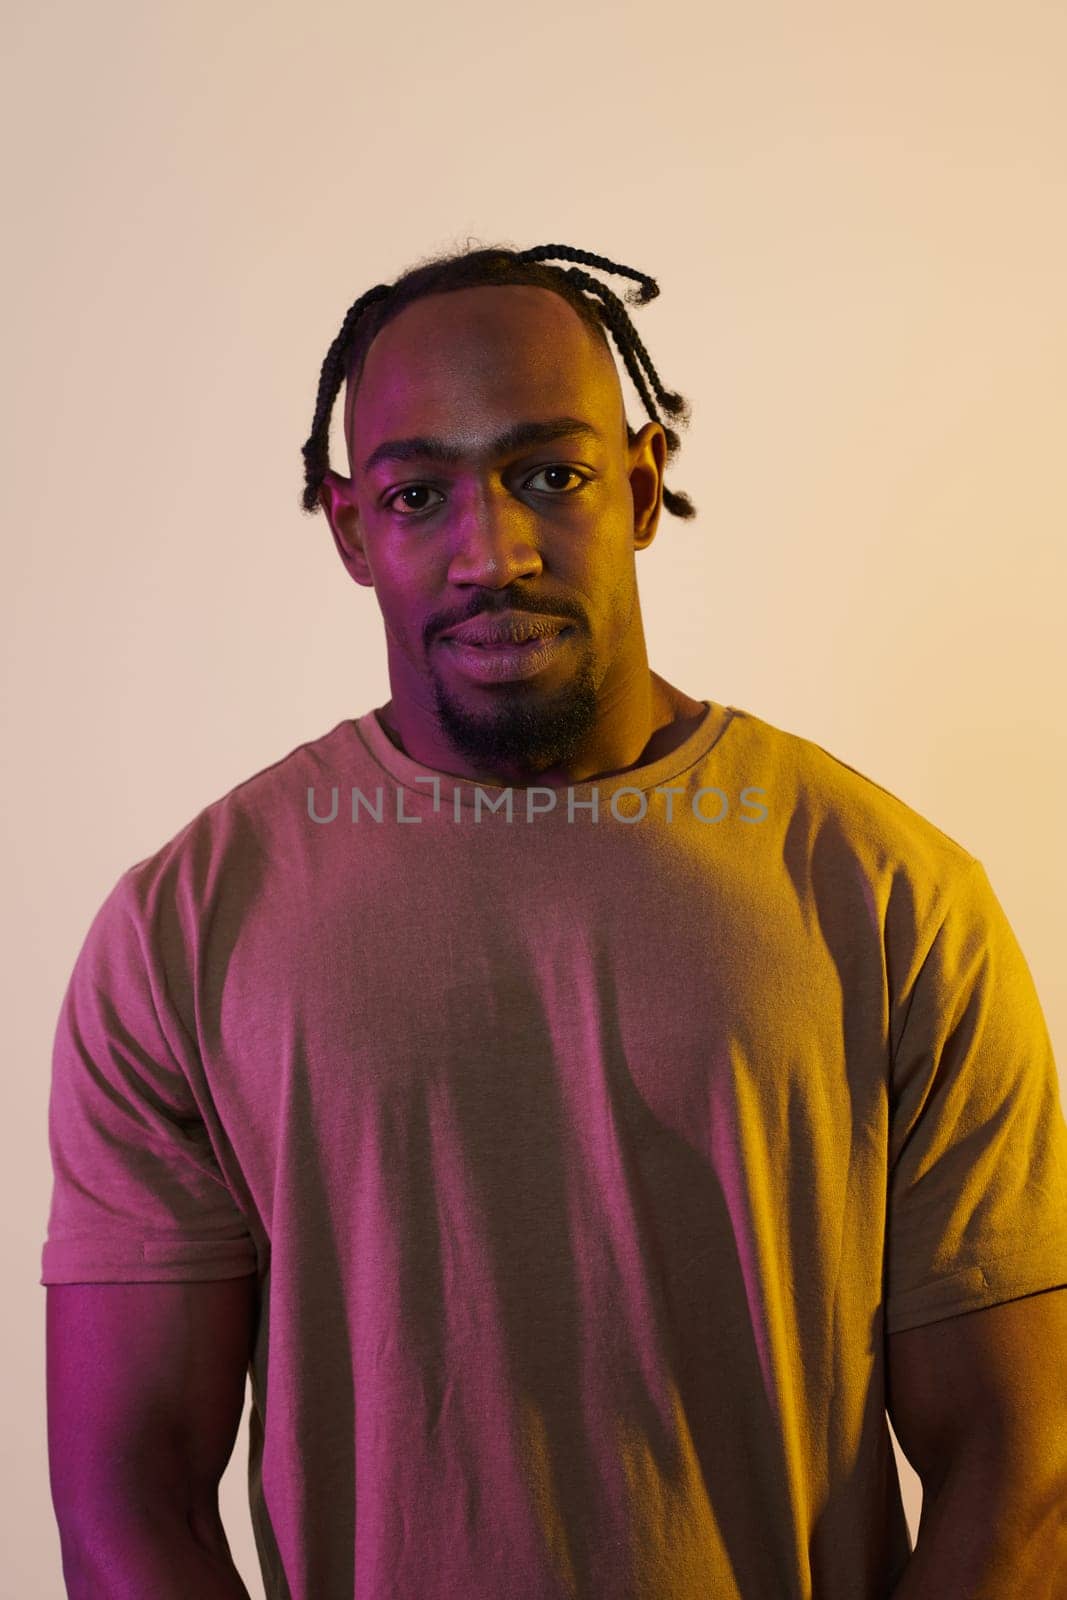 A charismatic and stylish African American man commands attention against a vibrant yellow gel background, showcasing his confident and contemporary fashion sense, radiating charm and sophistication in a striking portrait by dotshock